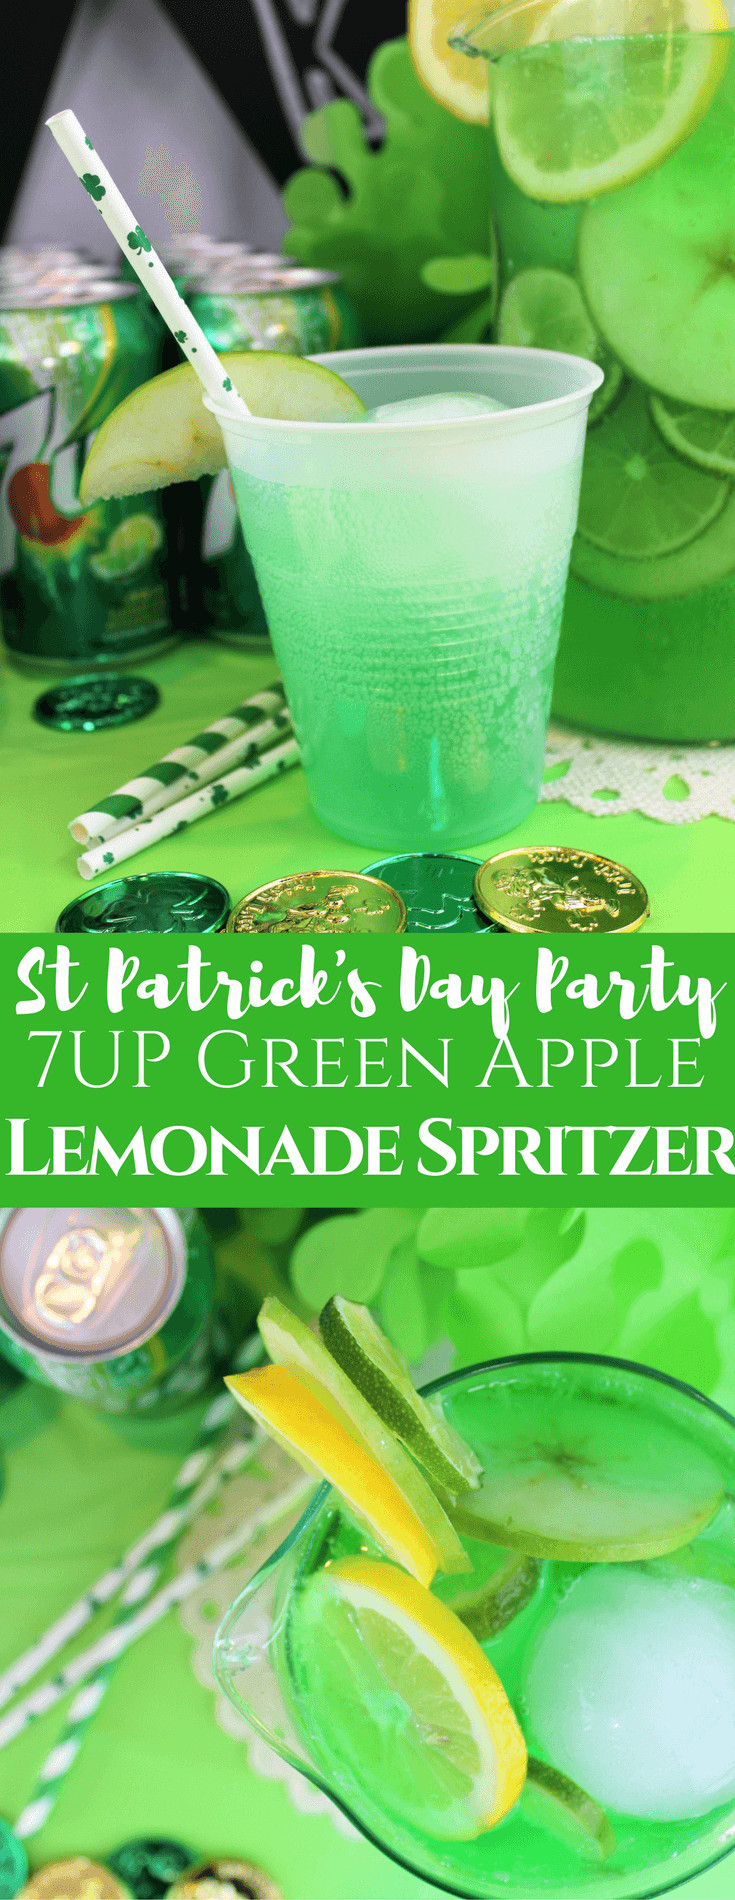 St Patrick's Day Food Ideas
 St Patrick s Day Party Recipes